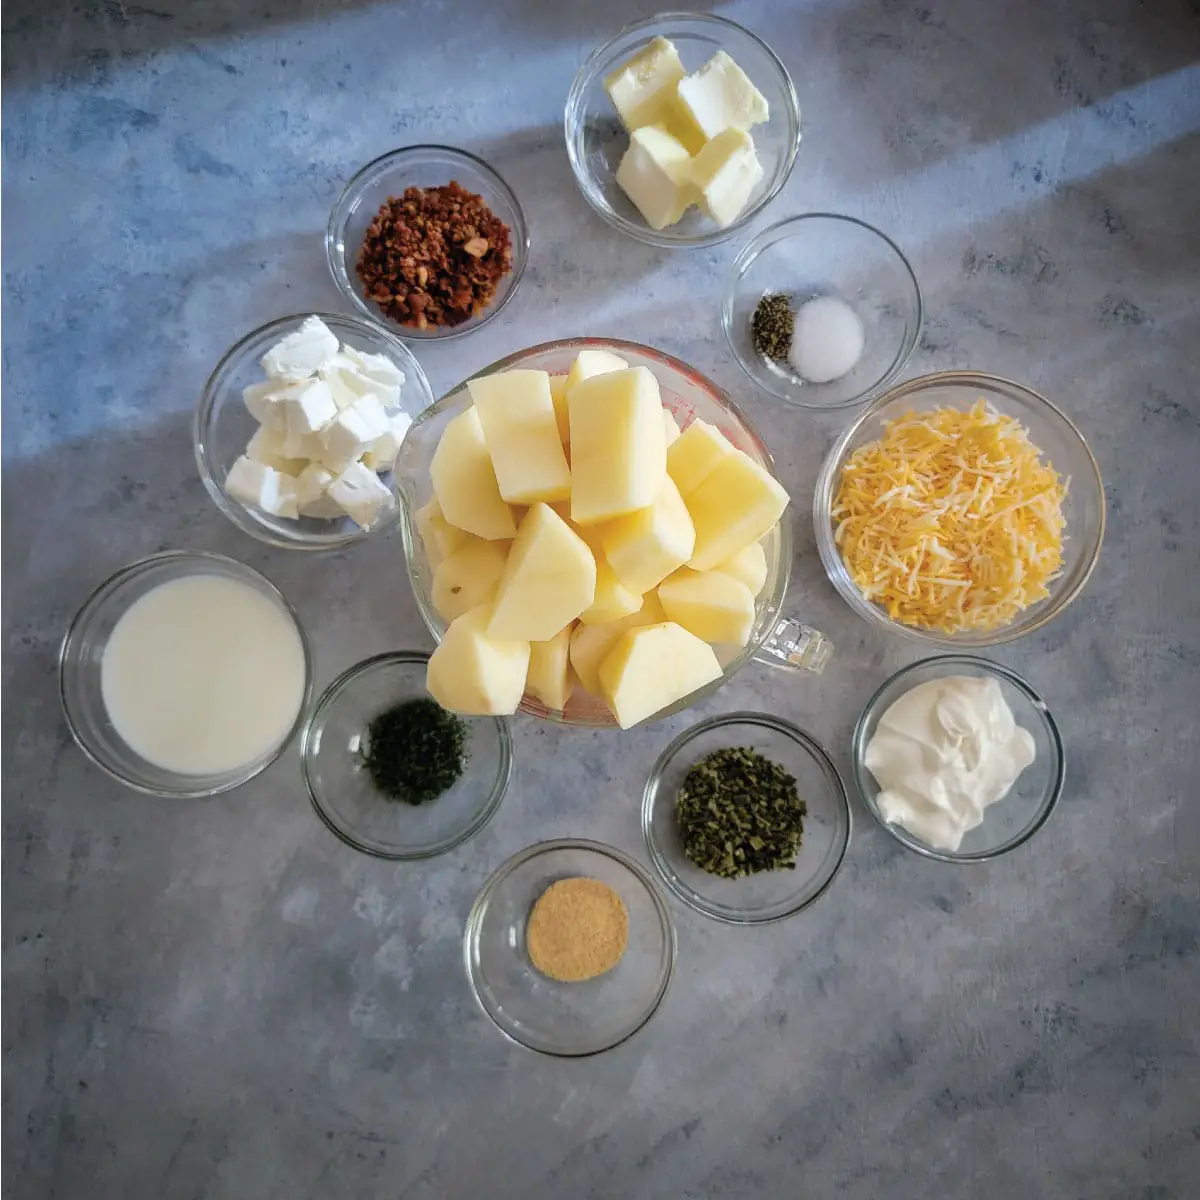 Ingredients in prep bowls - butter, potatoes, salt, pepper, shredded cheese, sour cream, chives, garlic powder, parsley, milk, cream cheese, bacon pieces.